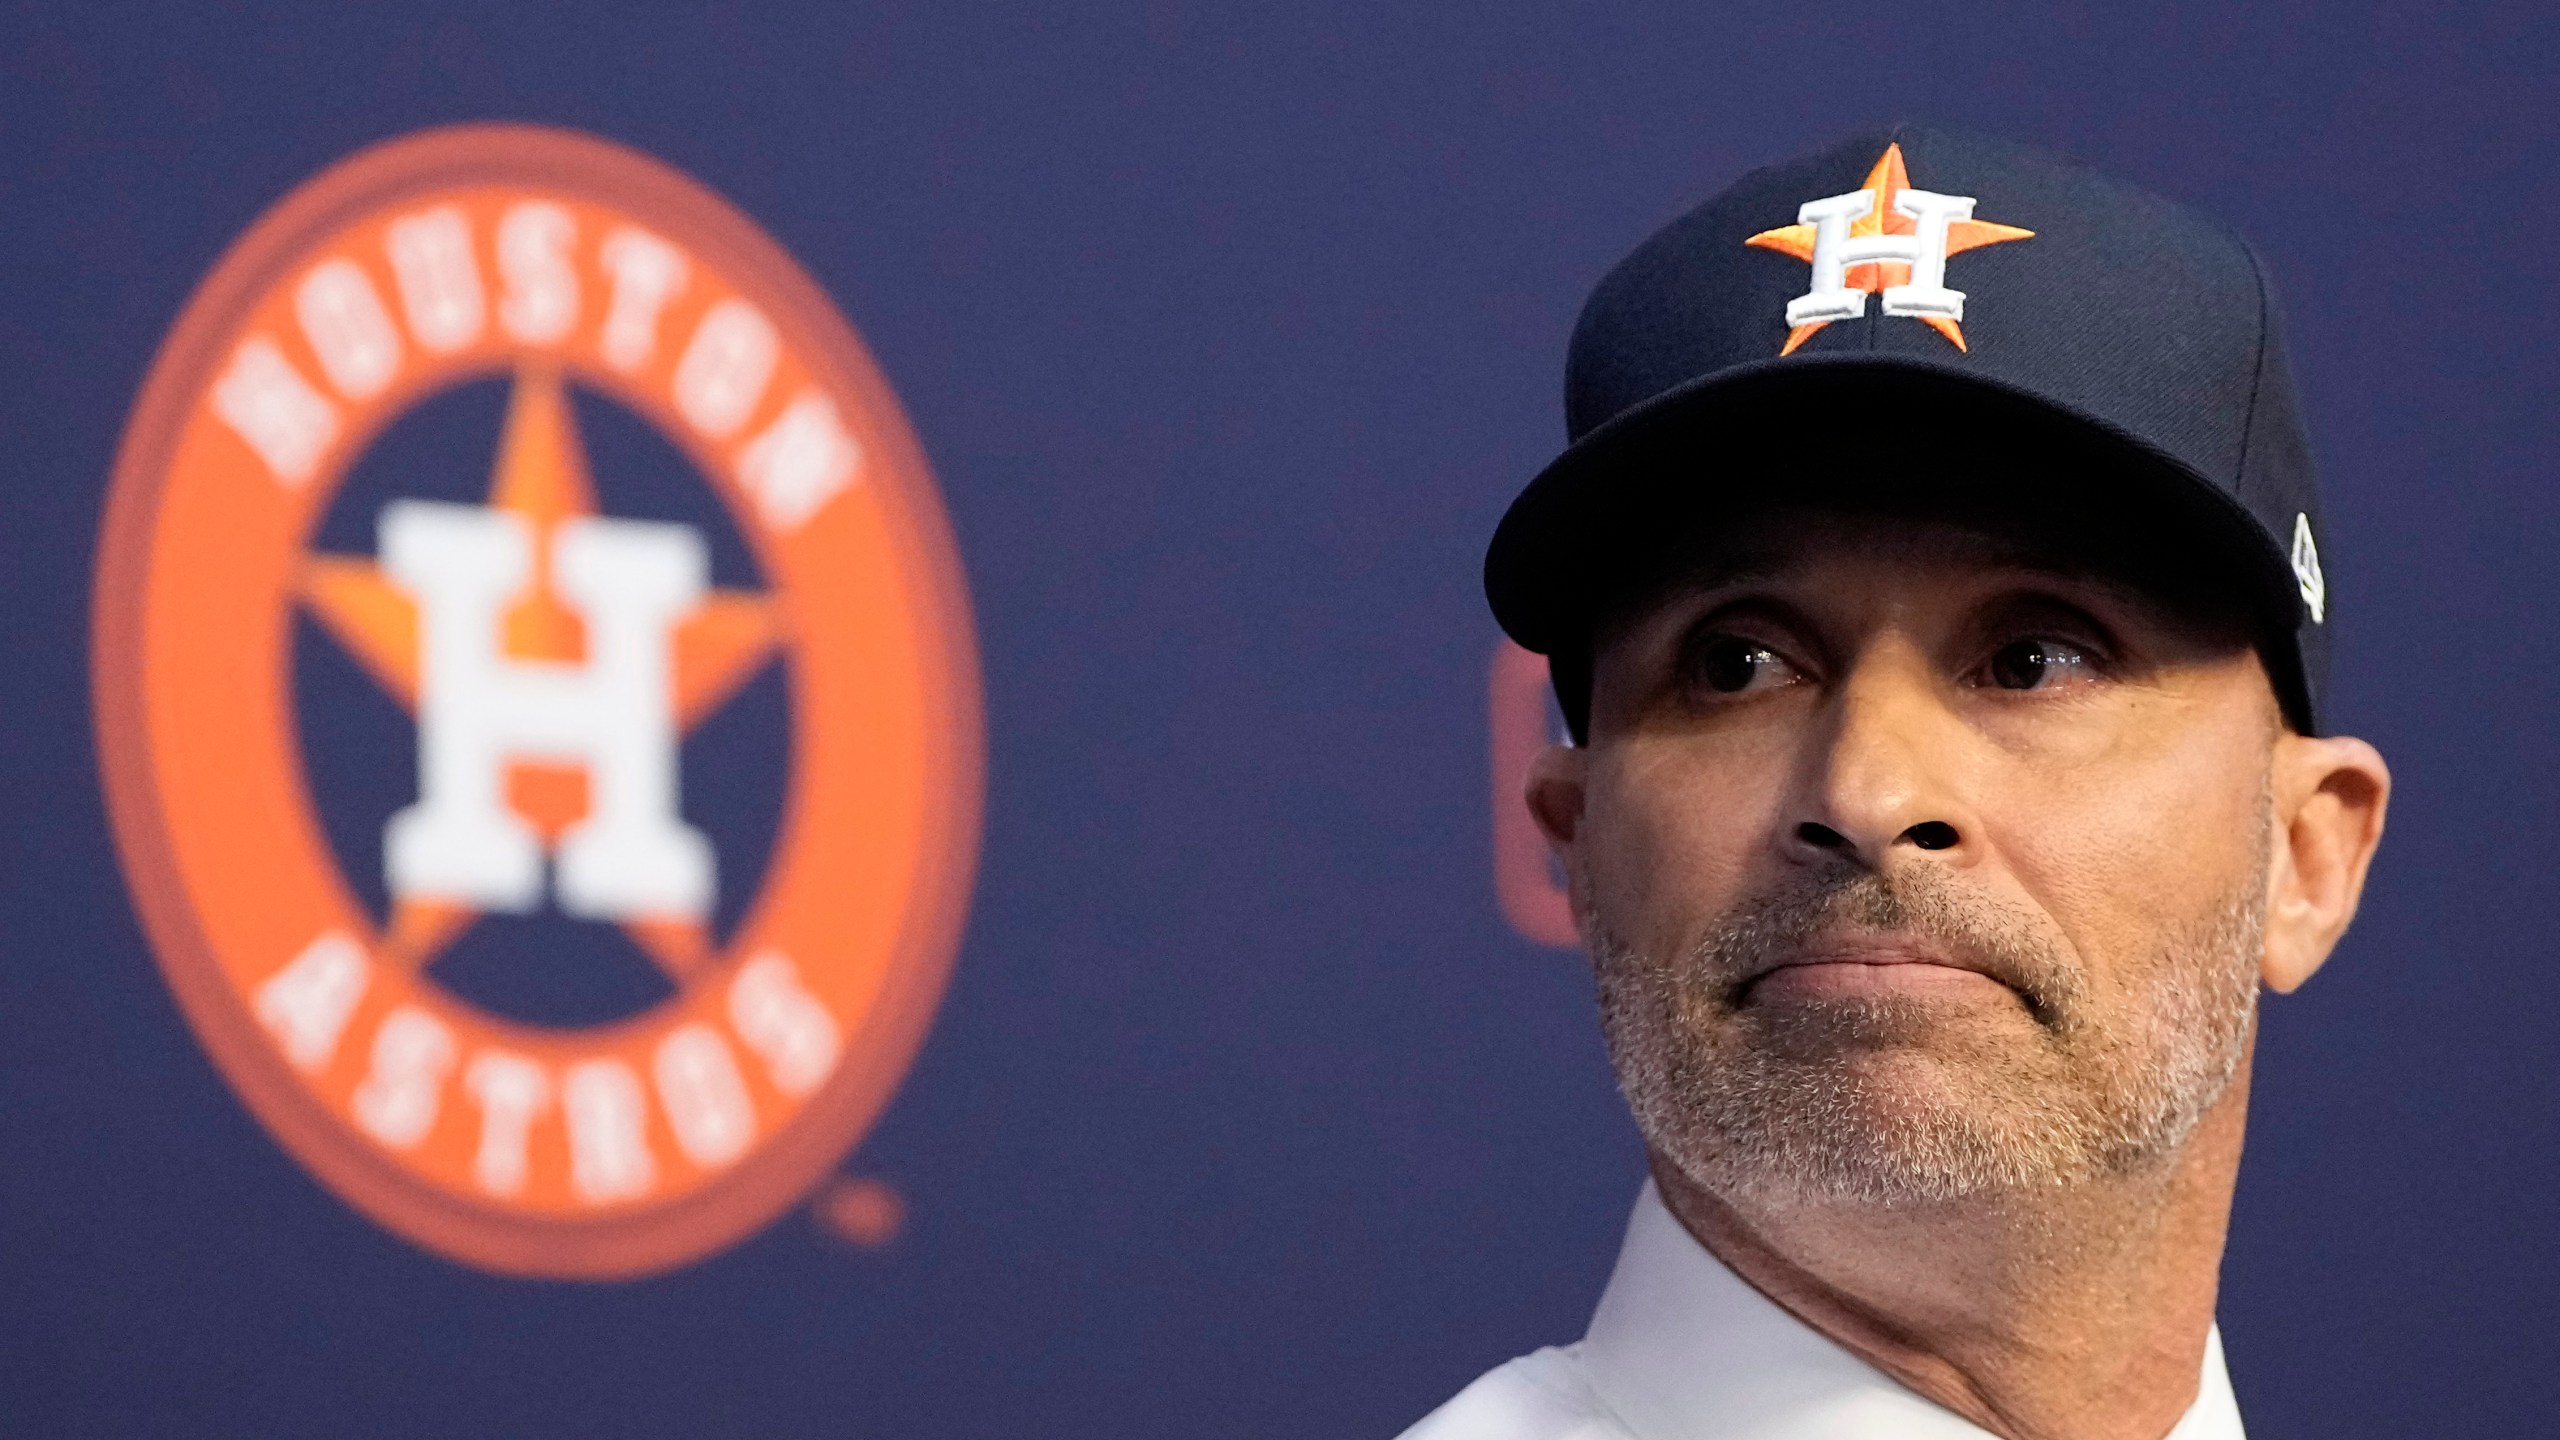 FILE - Houston Astros baseball team manager Joe Espada listens to a question during an introductory news conference Monday, Nov. 13, 2023, in Houston. Espada was an assistant for three managers who have won a World Series in Joe Girardi, A.J. Hinch and Dusty Baker before becoming a skipper for the first time after the Houston Astros hired him following Baker’s retirement this offseason. (AP Photo/David J. Phillip, File)